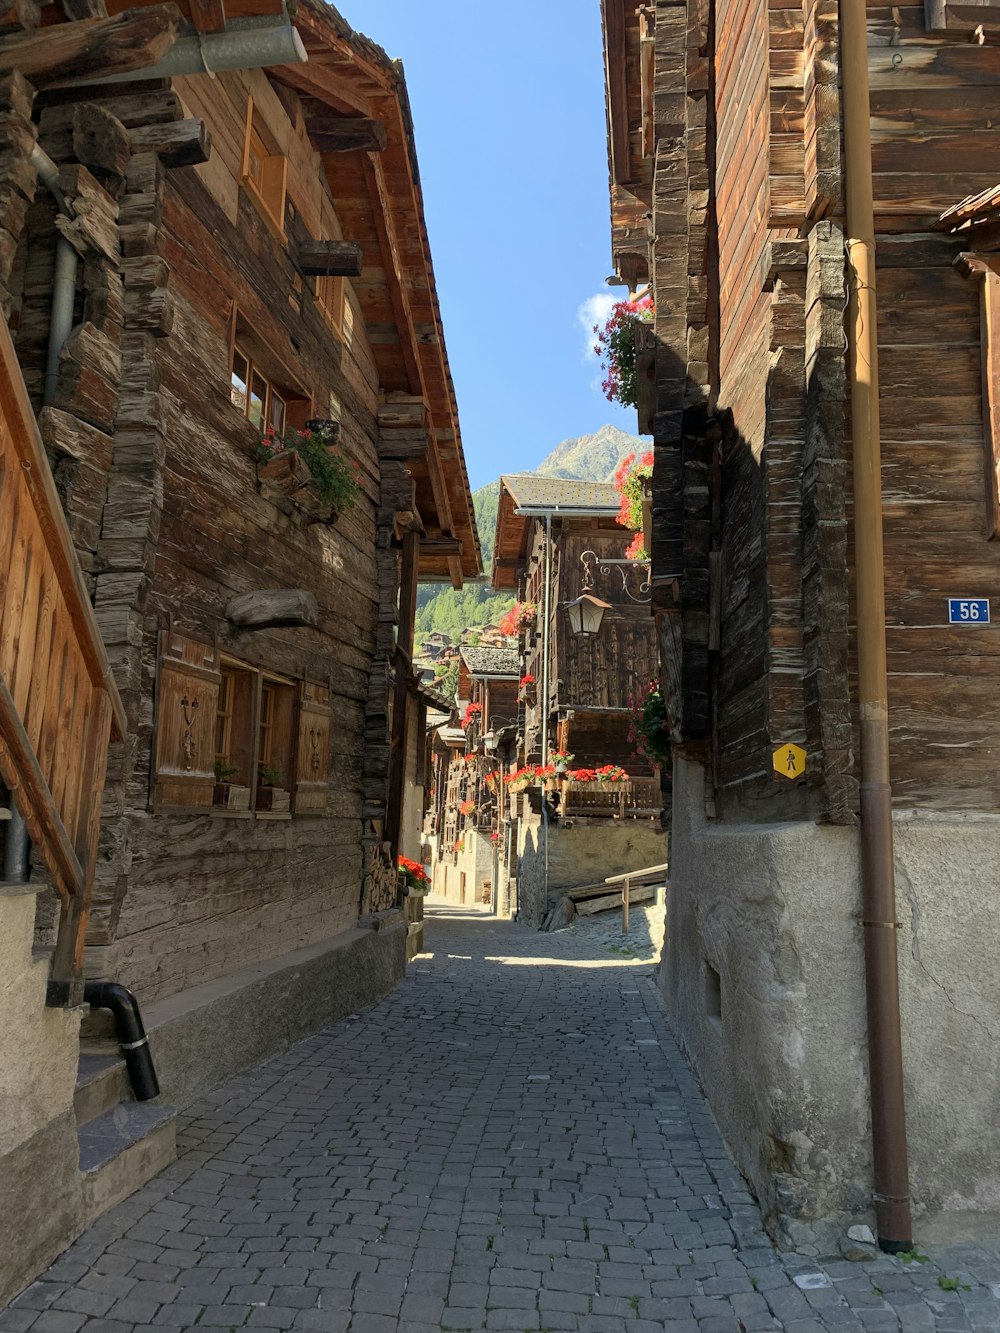 a cobblestone street with wooden buildings on both sides